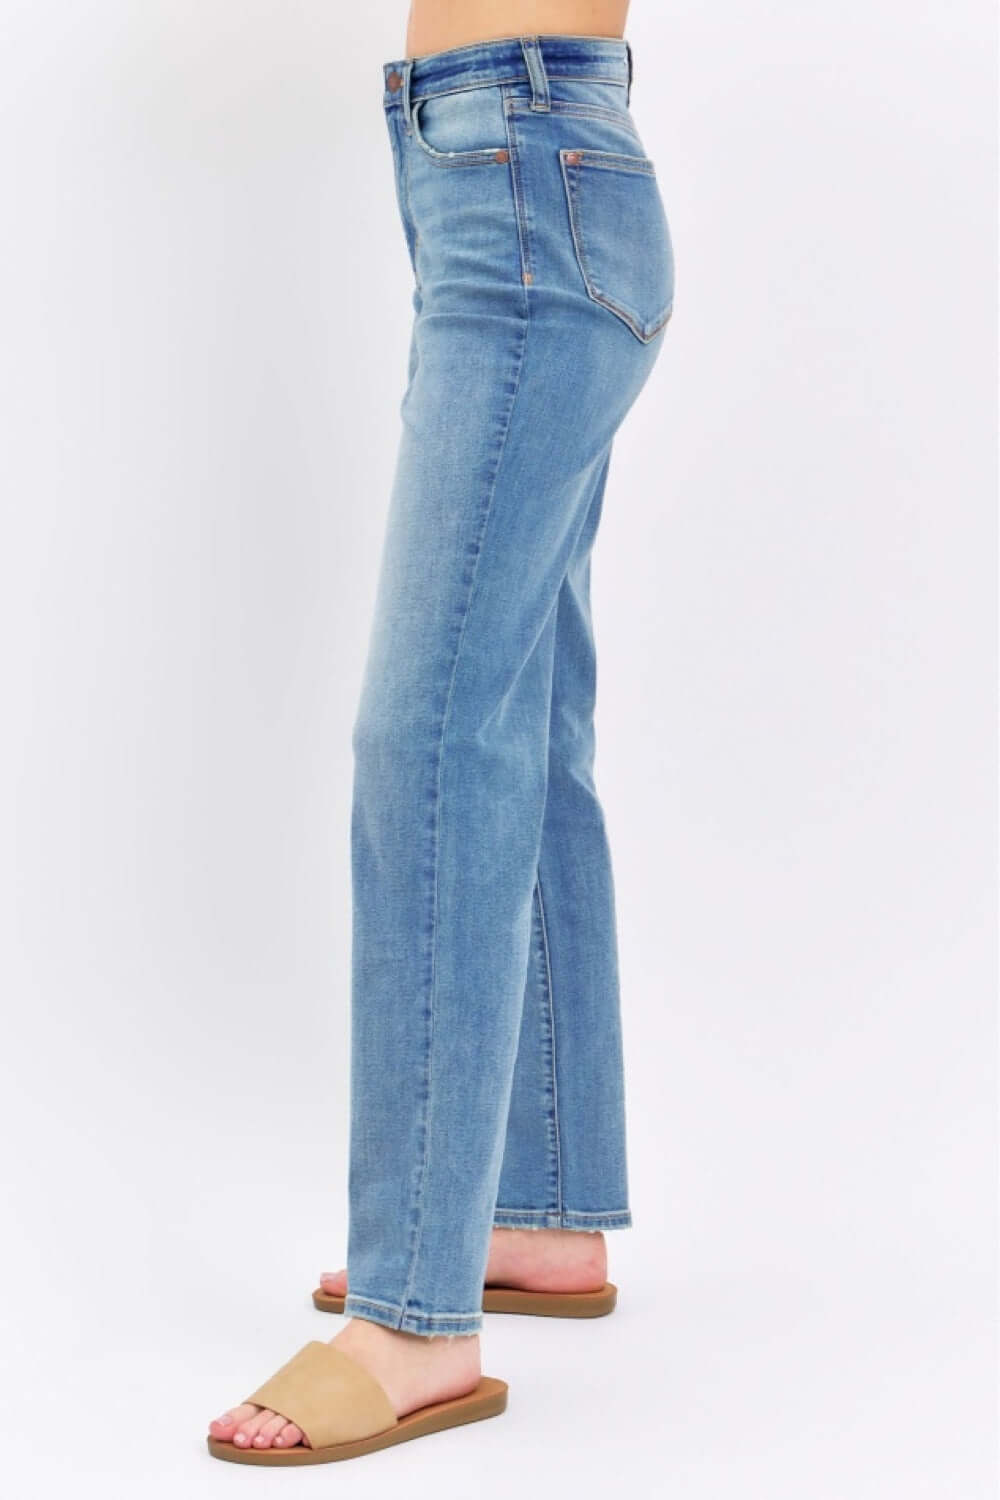 JUDY BLUE Full Size High Waist Straight Jeans at Bella Road